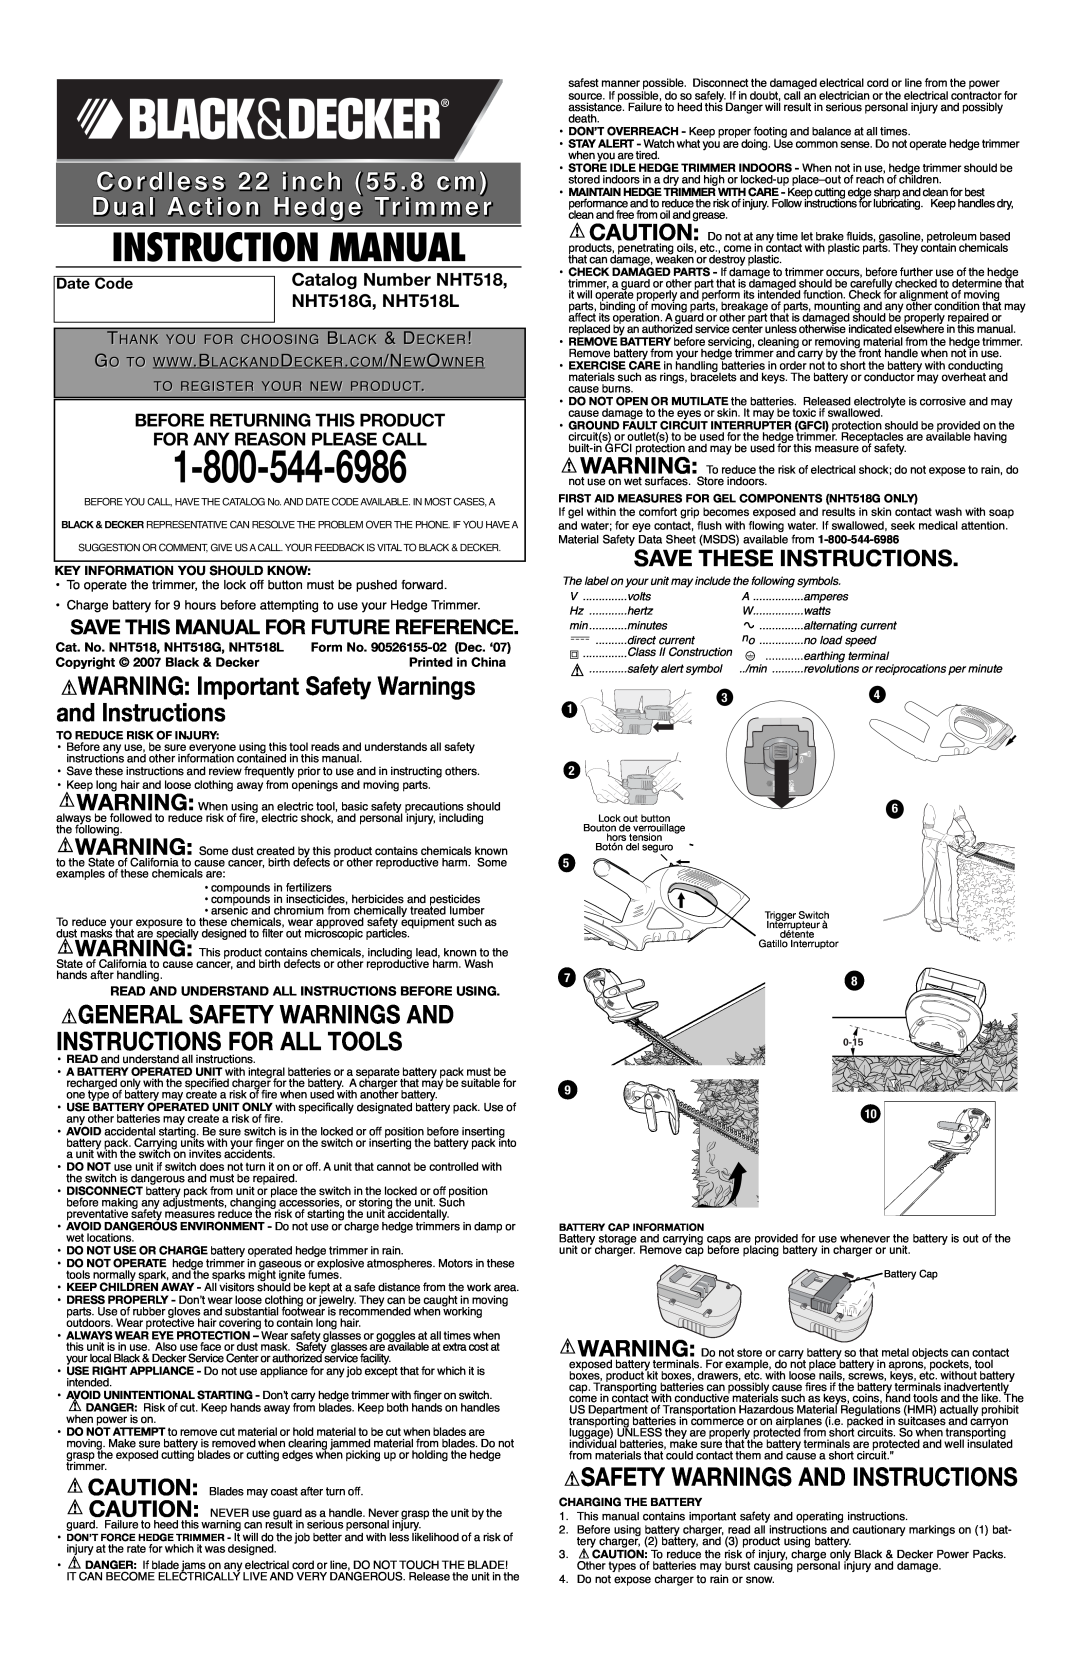 Black & Decker NHT518G instruction manual WARNING Important Safety Warnings and Instructions, Catalog Number NHT518 